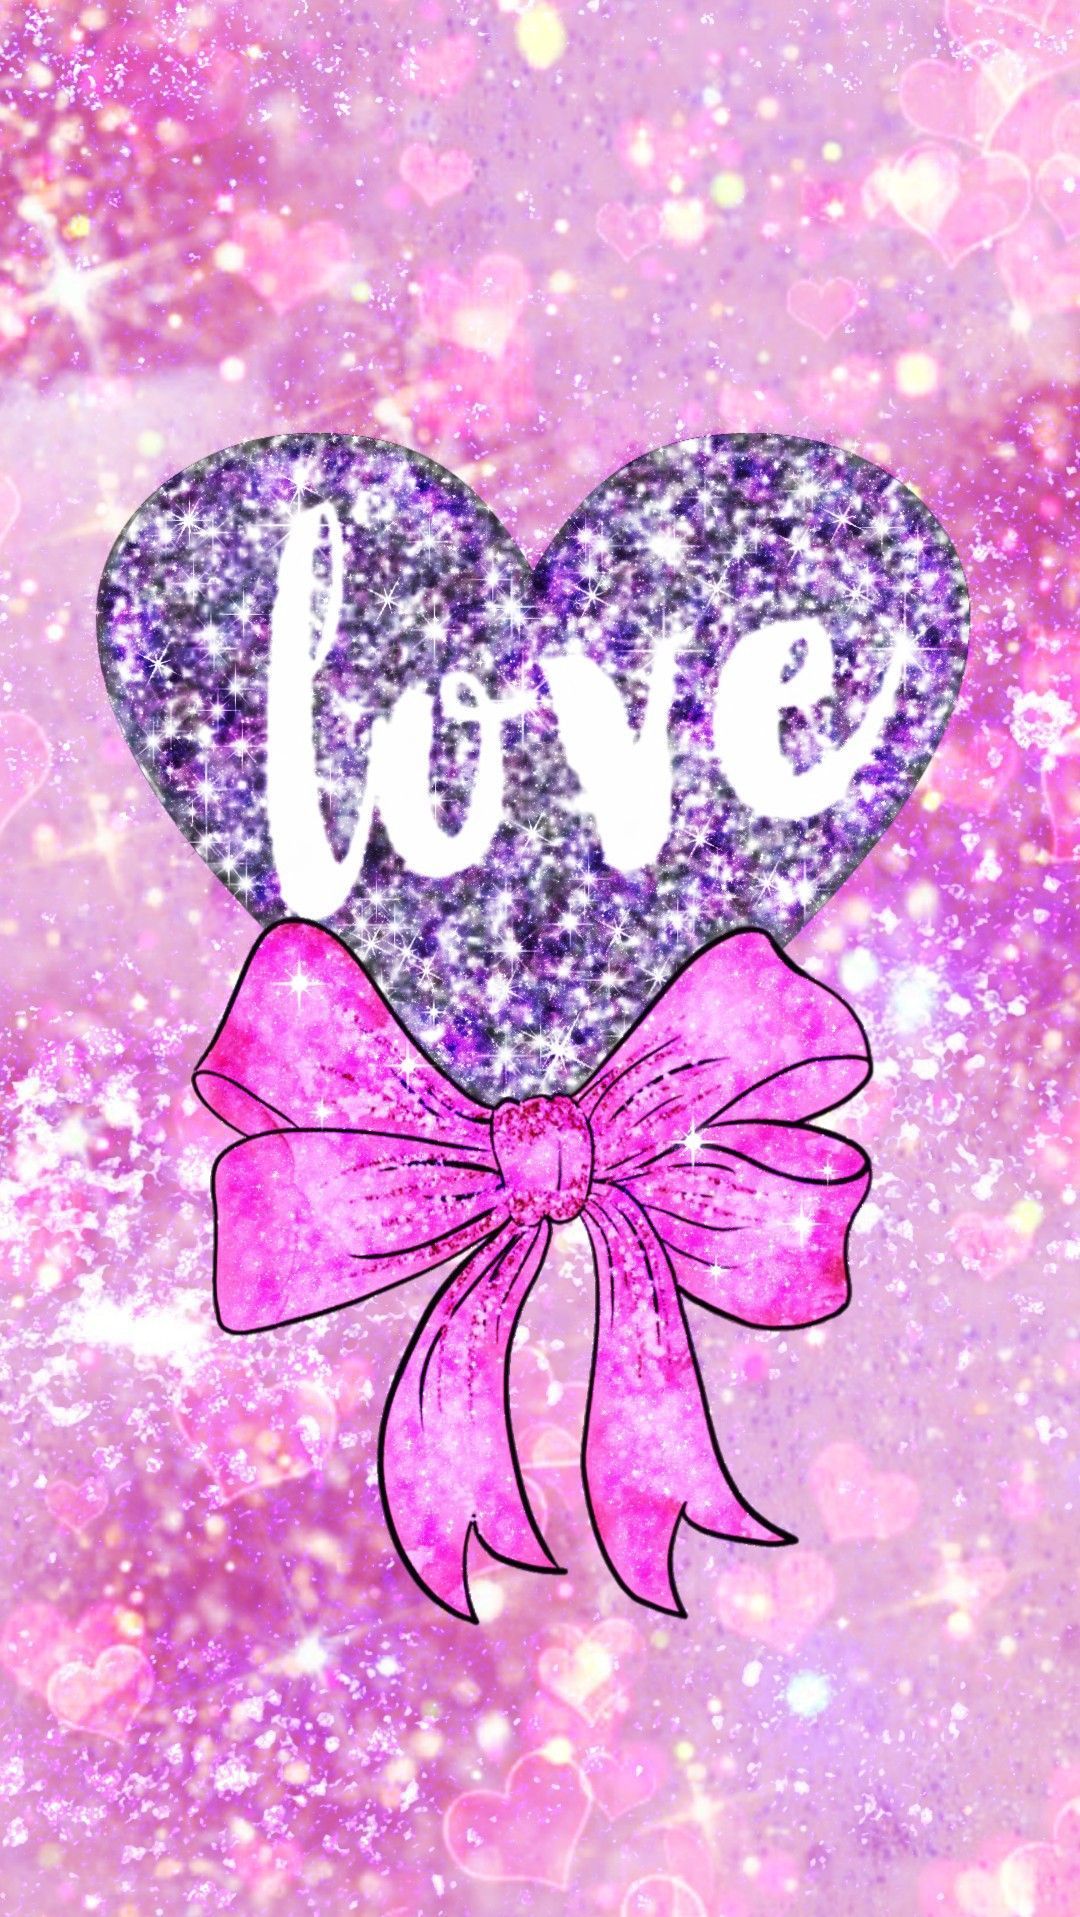 Glittery Valentine Heart, made by me #love #valentinesday #bow #pink #girly #love #bemine #iloveyou #hearts. Valentines wallpaper, Heart wallpaper, Love wallpaper